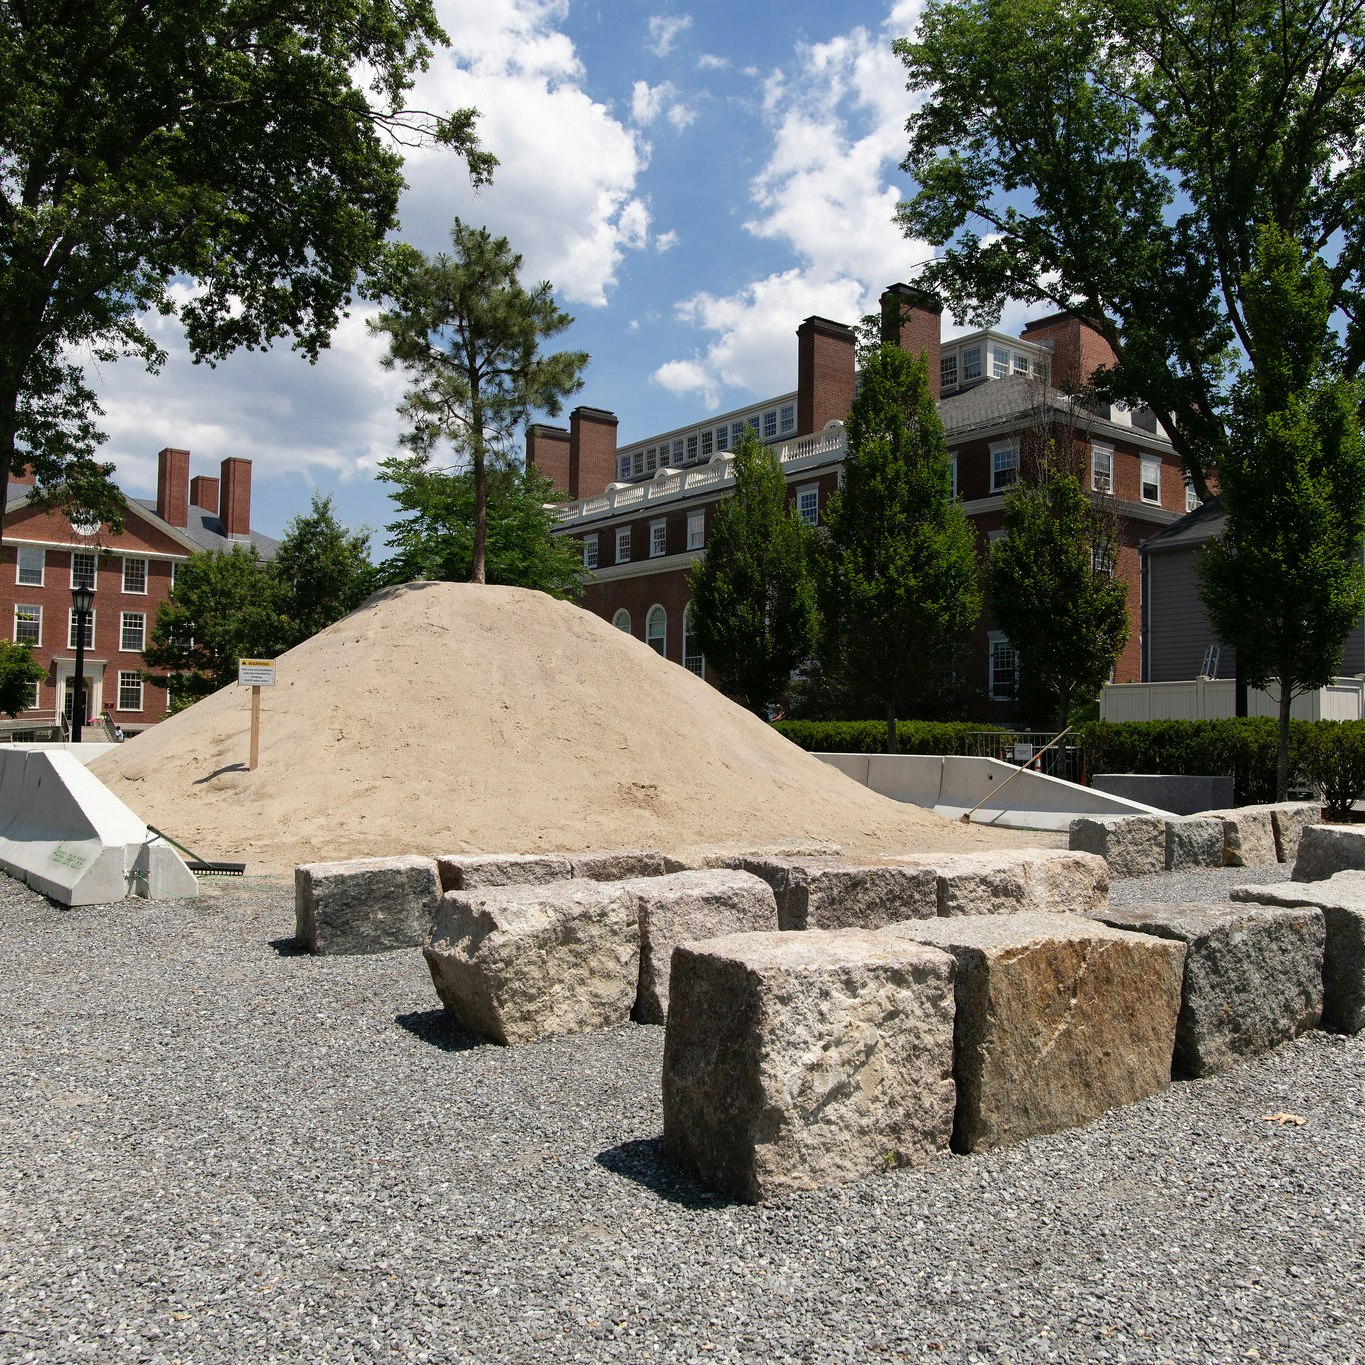 A mound of sand is planted with a pitch pine and partially contained by a ring of concrete barriers opposite rows of granite benches.